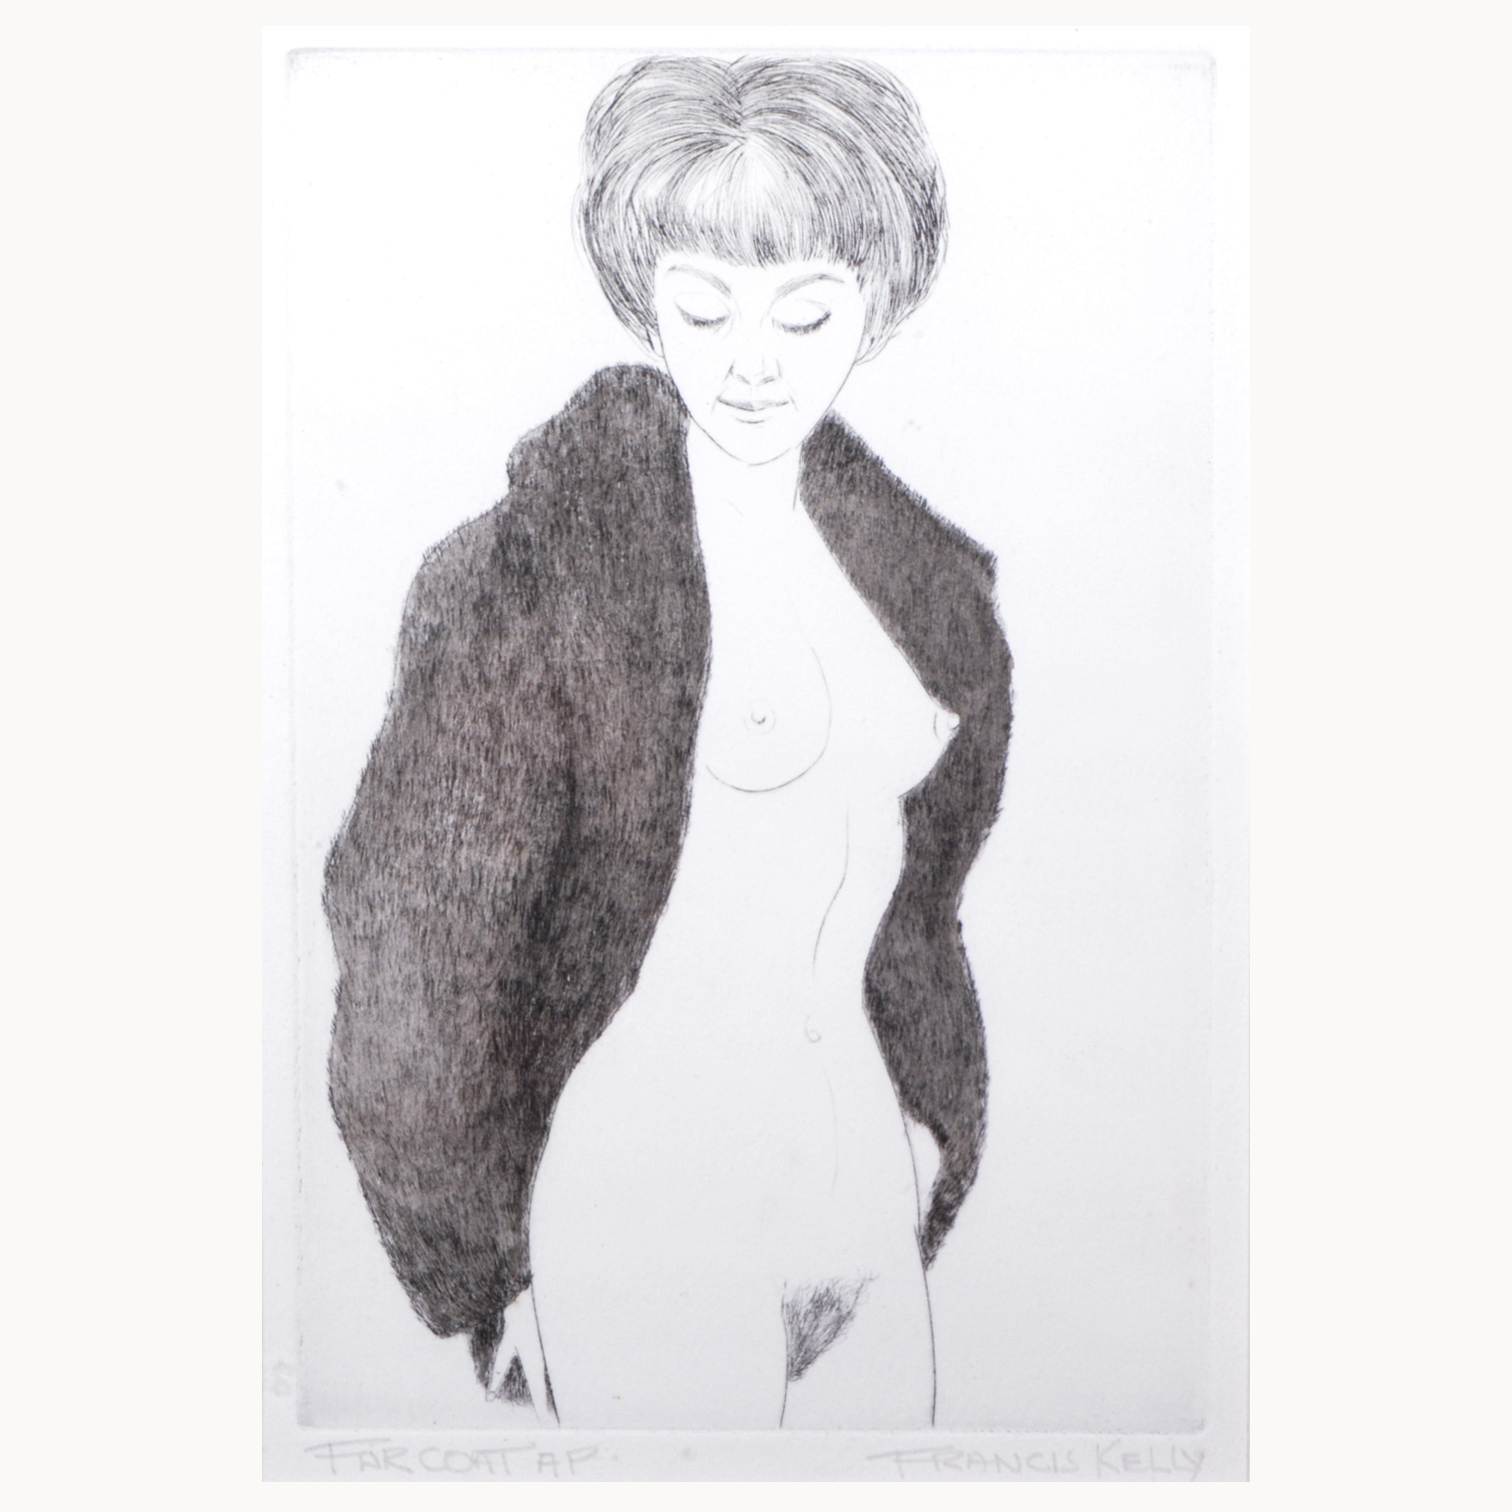 After Francis Kelly, Fur Coat, monochrome print, signed, titled, marked 'artist's proof',